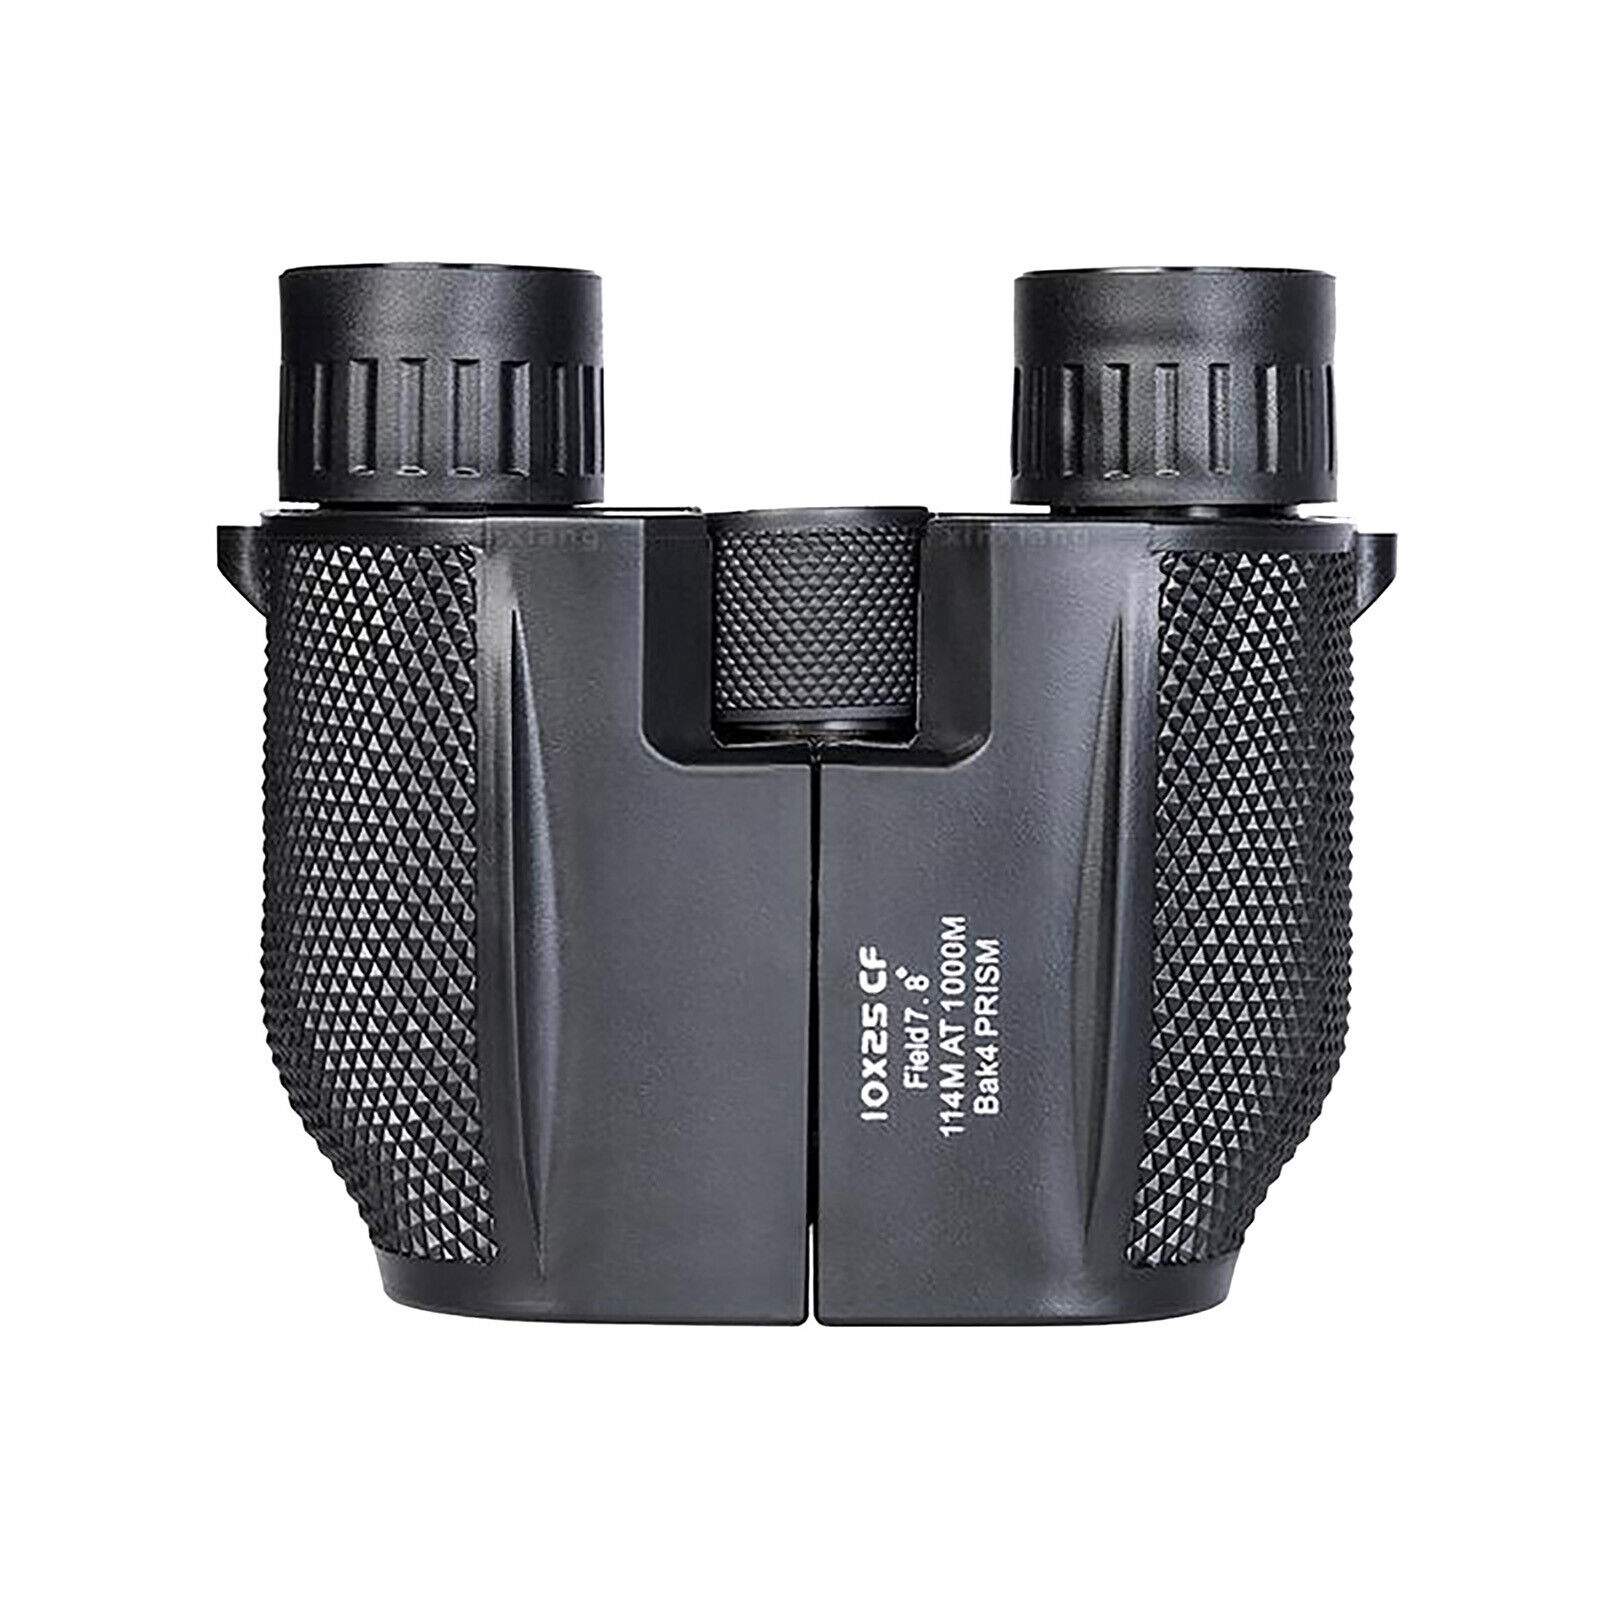 10 Times Binoculars HD 10x25 Telescope Fixed Zoom Portable Gifts For Children